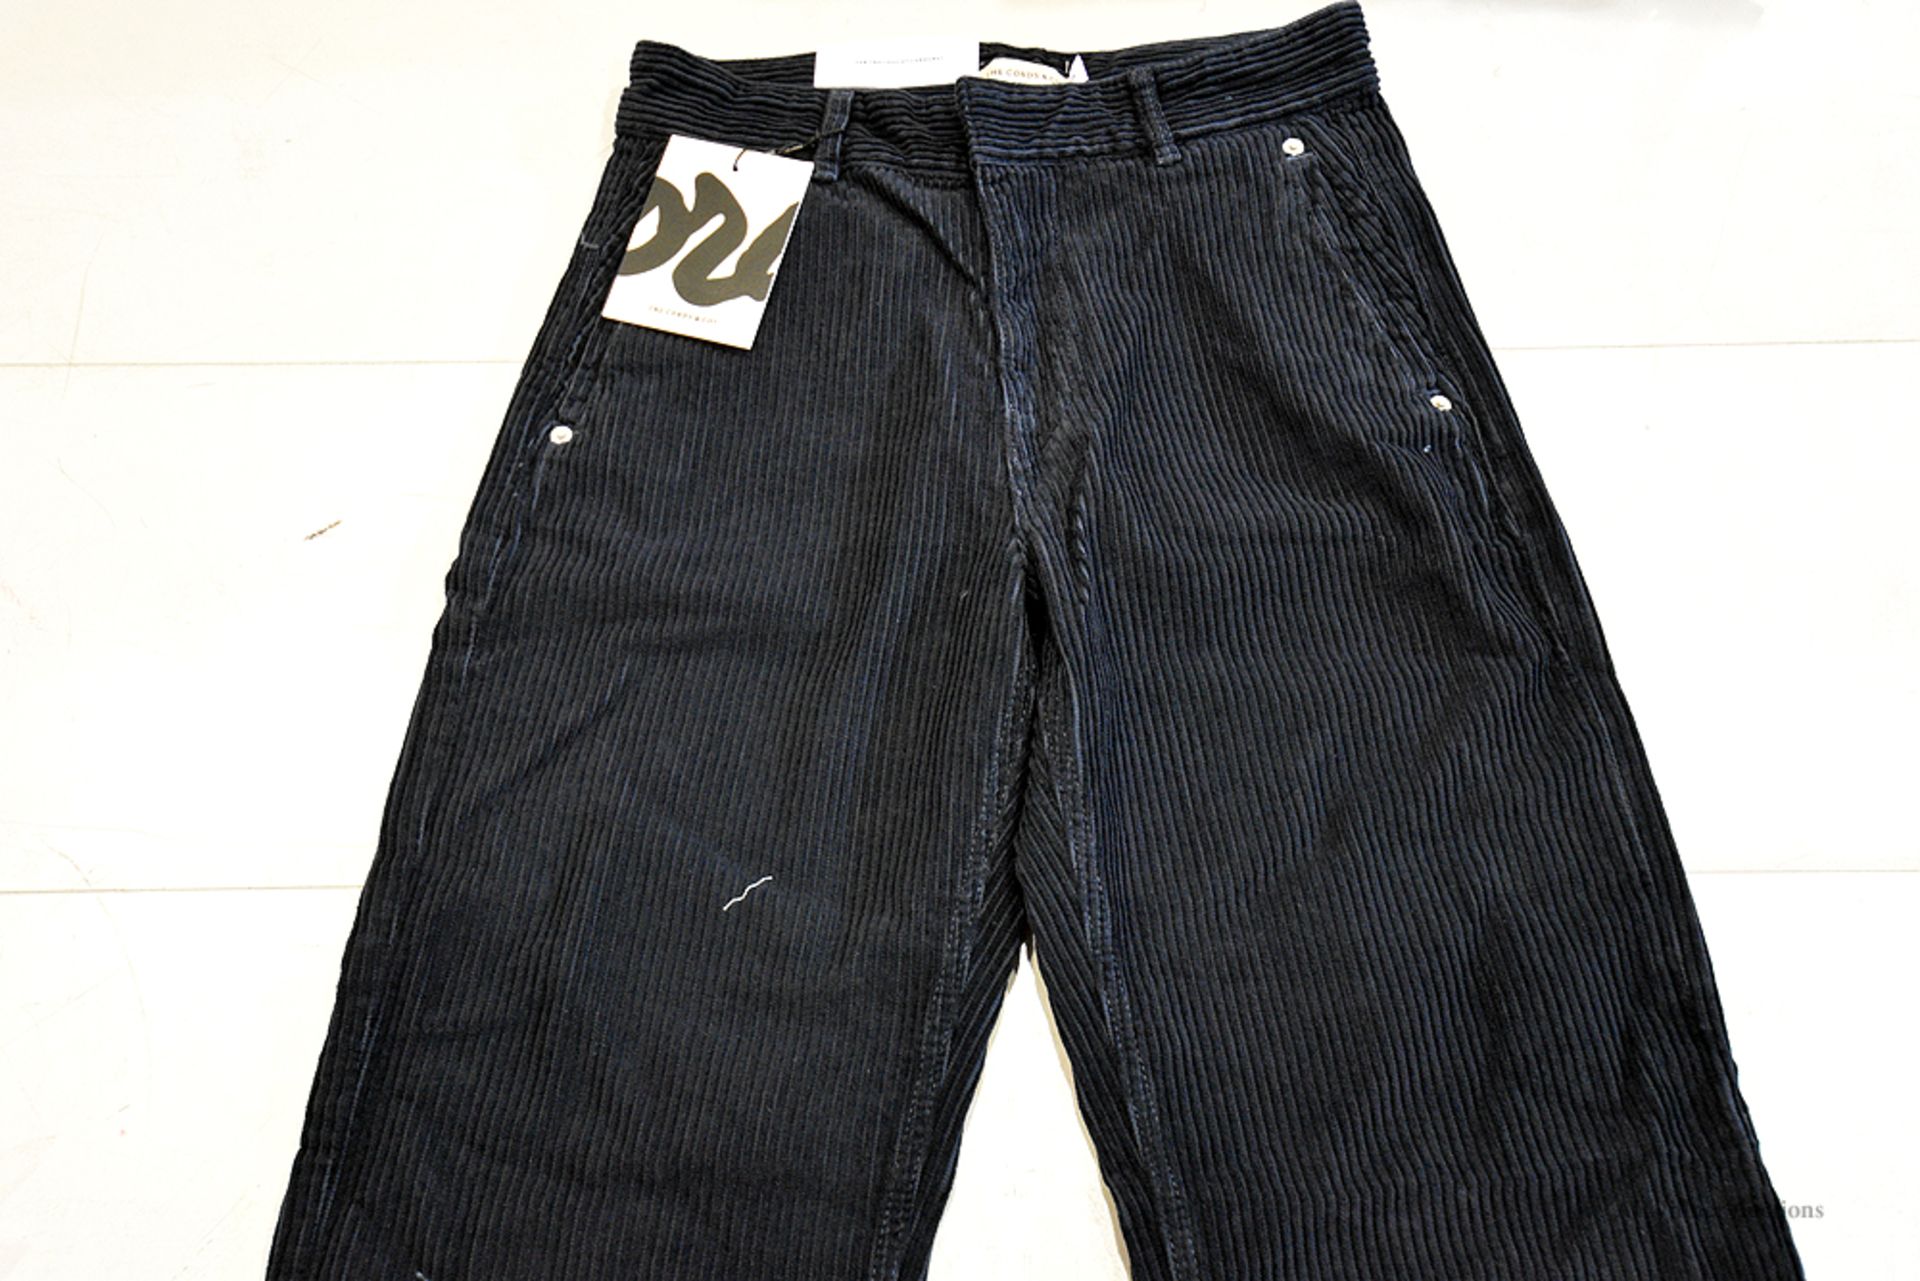 The Cords & Co. "Leo" Mens/ Chinos/ High Waist/ Straight /Wide Leg Pants $160 - Image 2 of 5